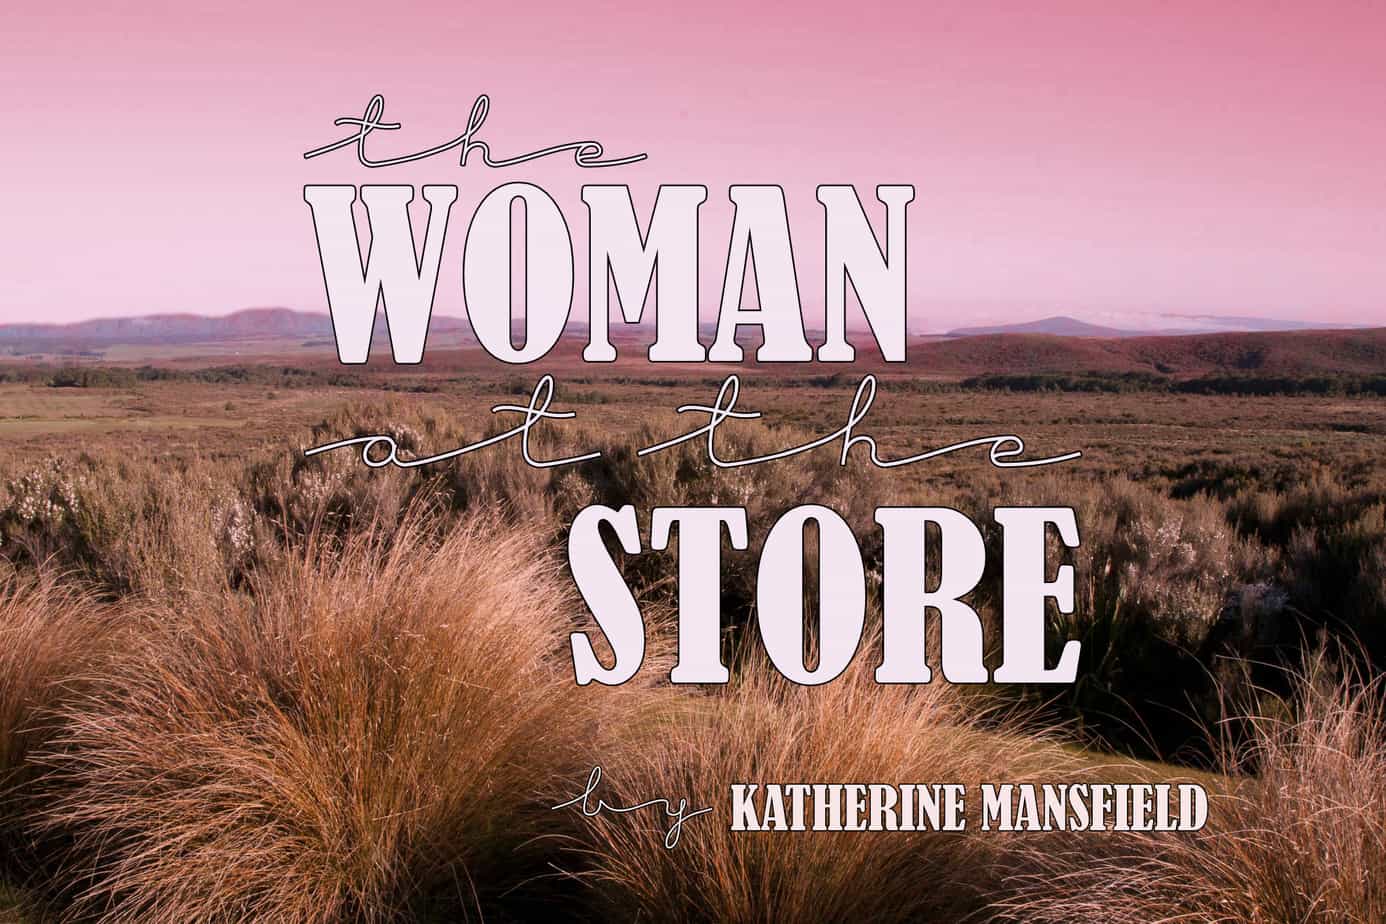 The Woman At The Store by Katherine Mansfield Short Story Analysis